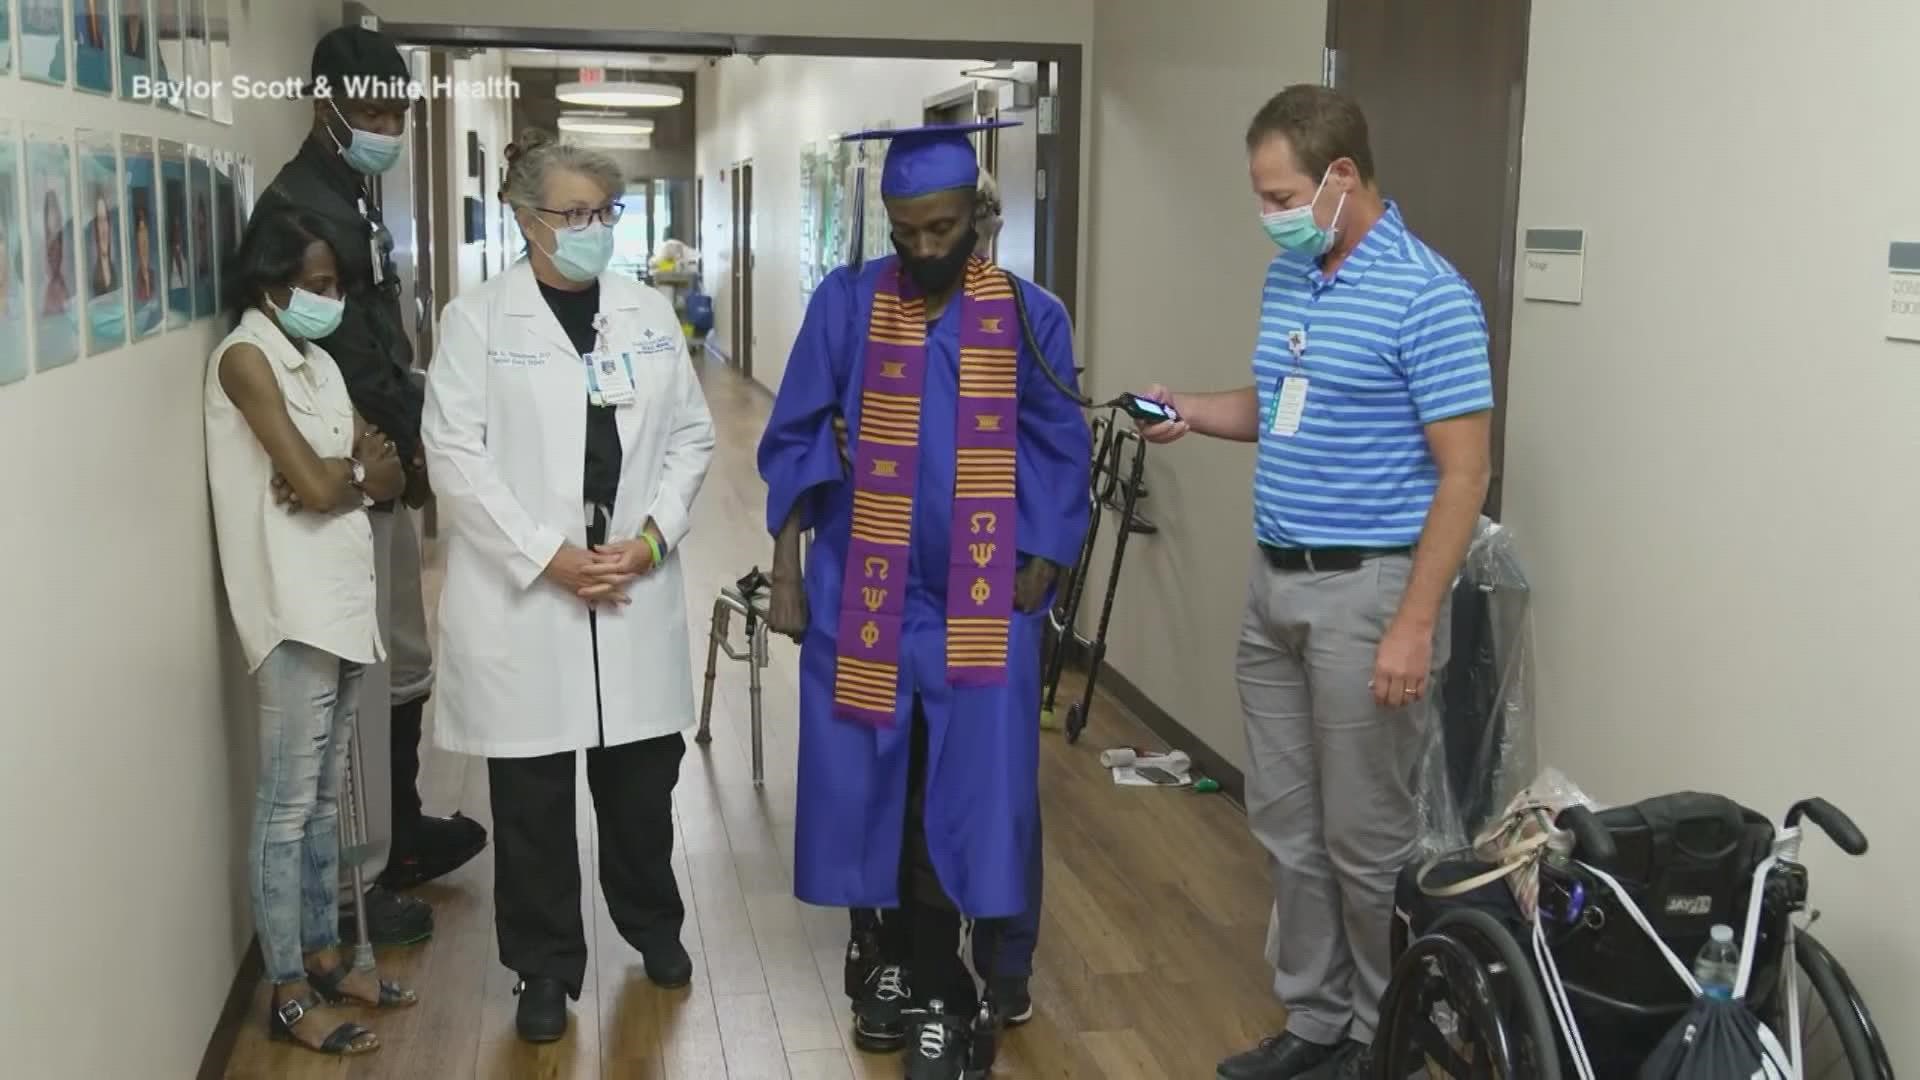 Borner's spinal cord was injured during football practice in 2009. With the help of an exoskeleton, he walked again for the first time this summer.